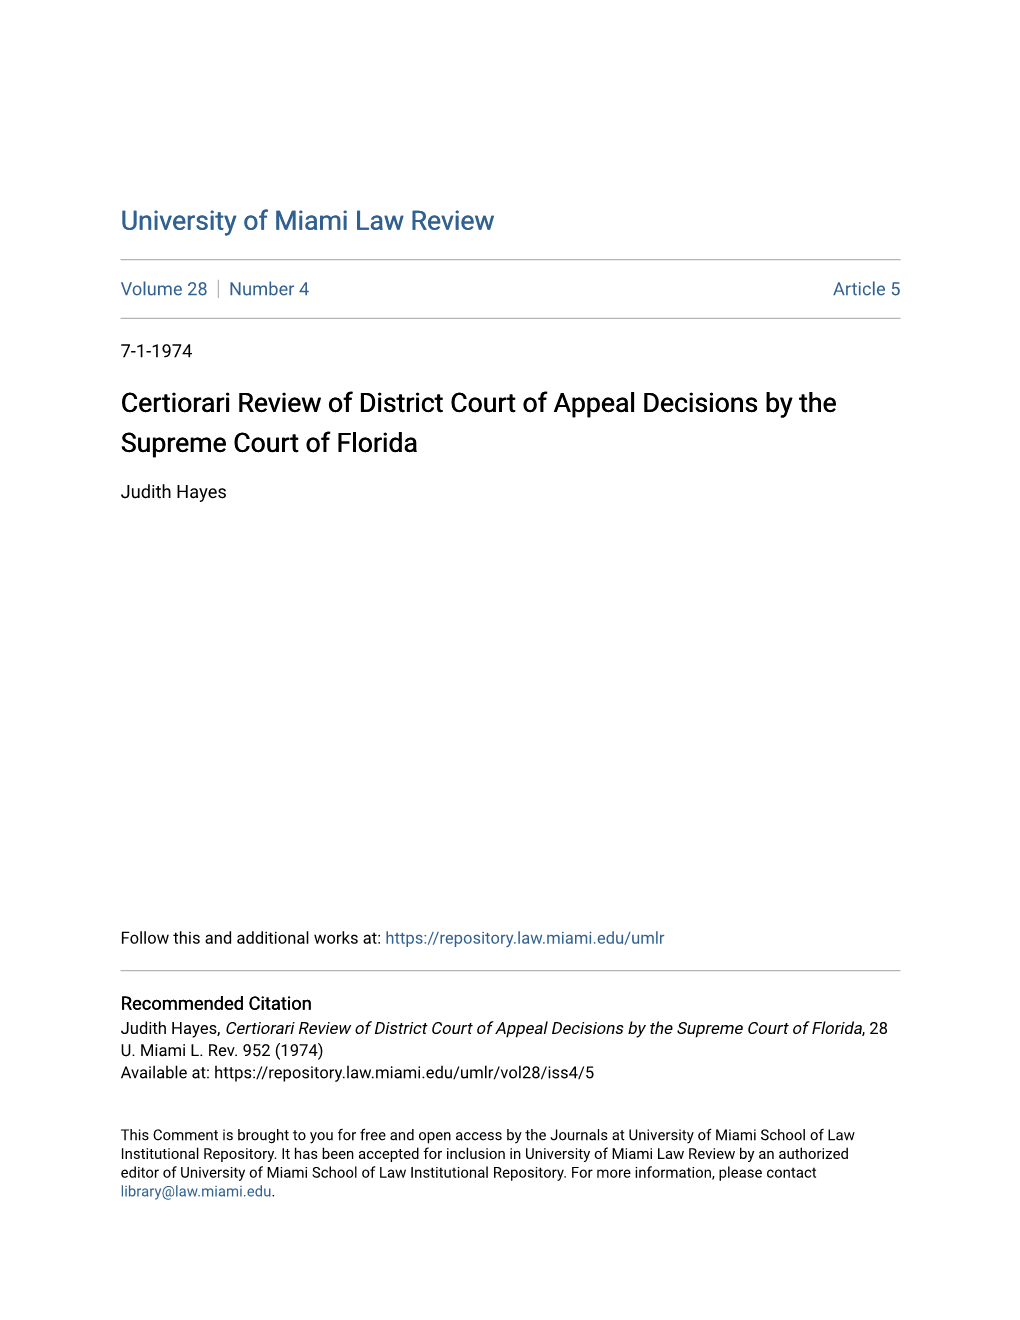 Certiorari Review of District Court of Appeal Decisions by the Supreme Court of Florida